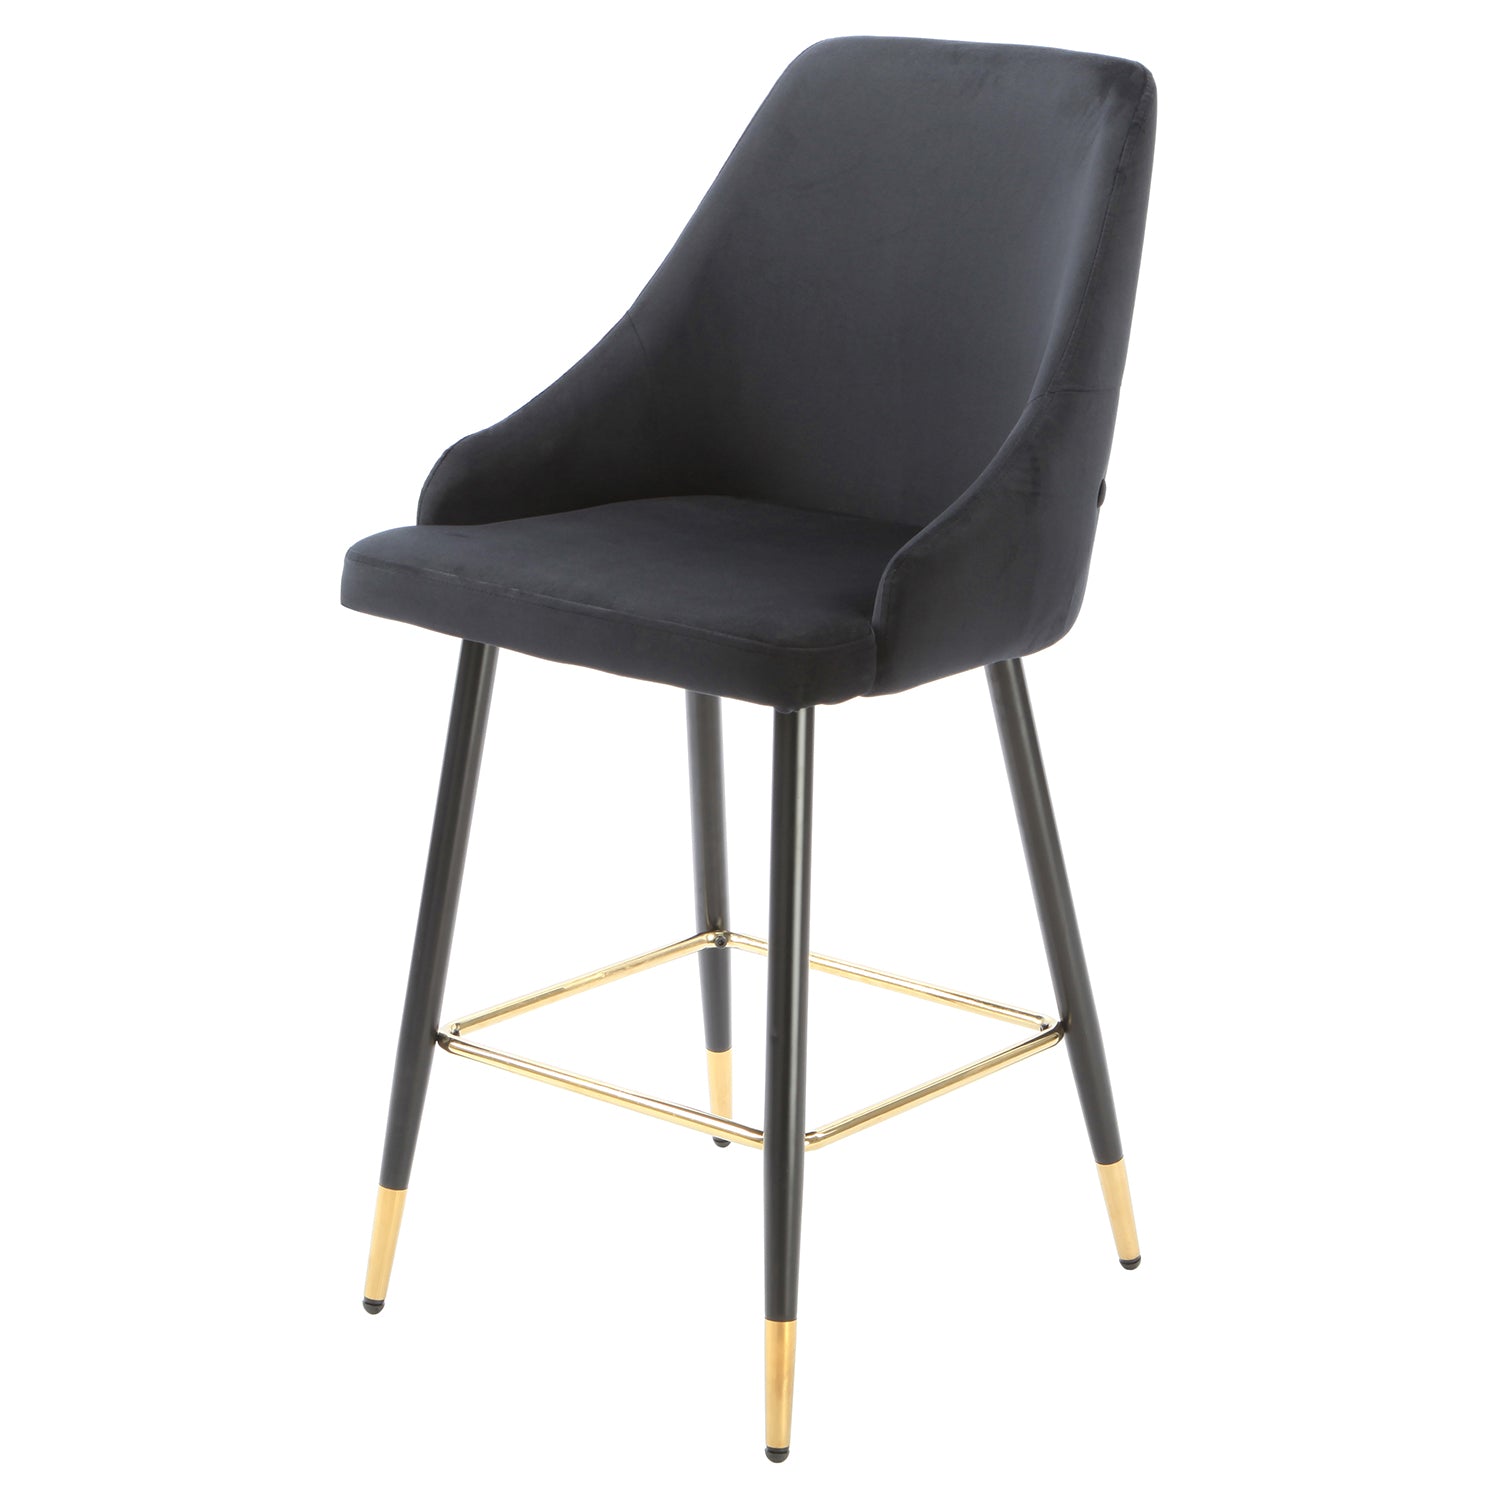 2 Set chesterfield black kitchen bar stool by Native